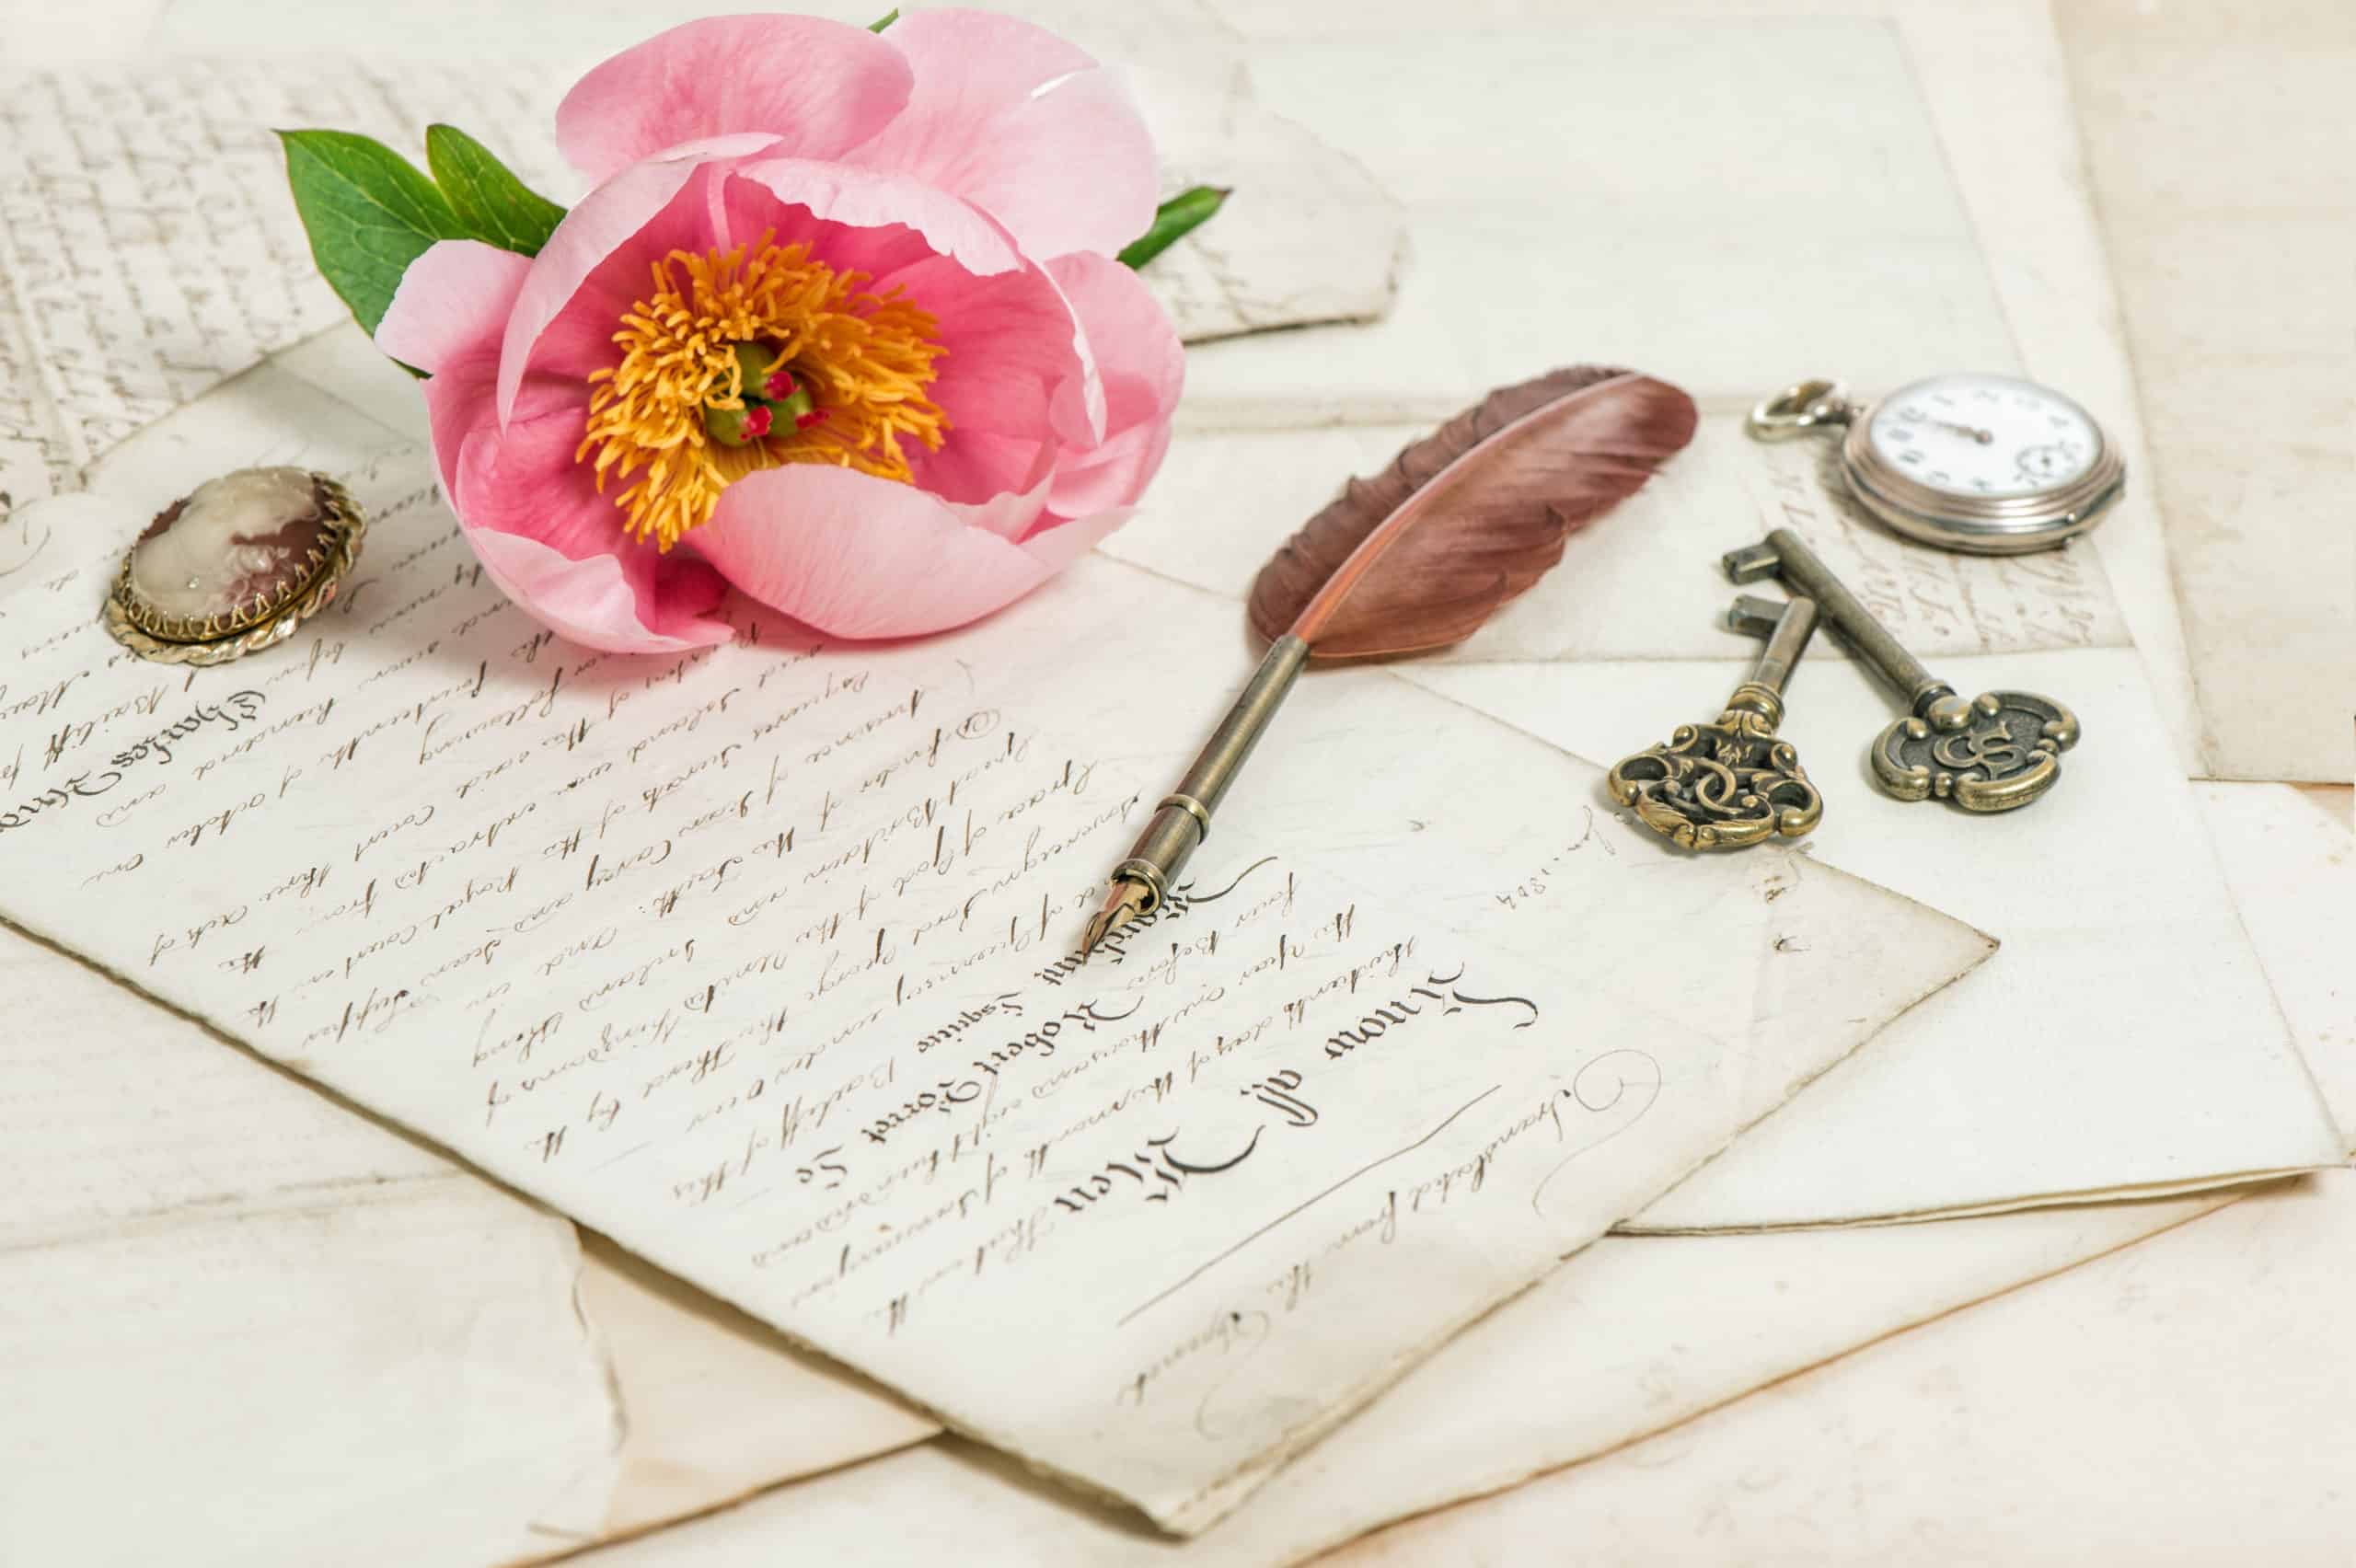 Old written works, vintage feather pen, keys, and pocket watch.